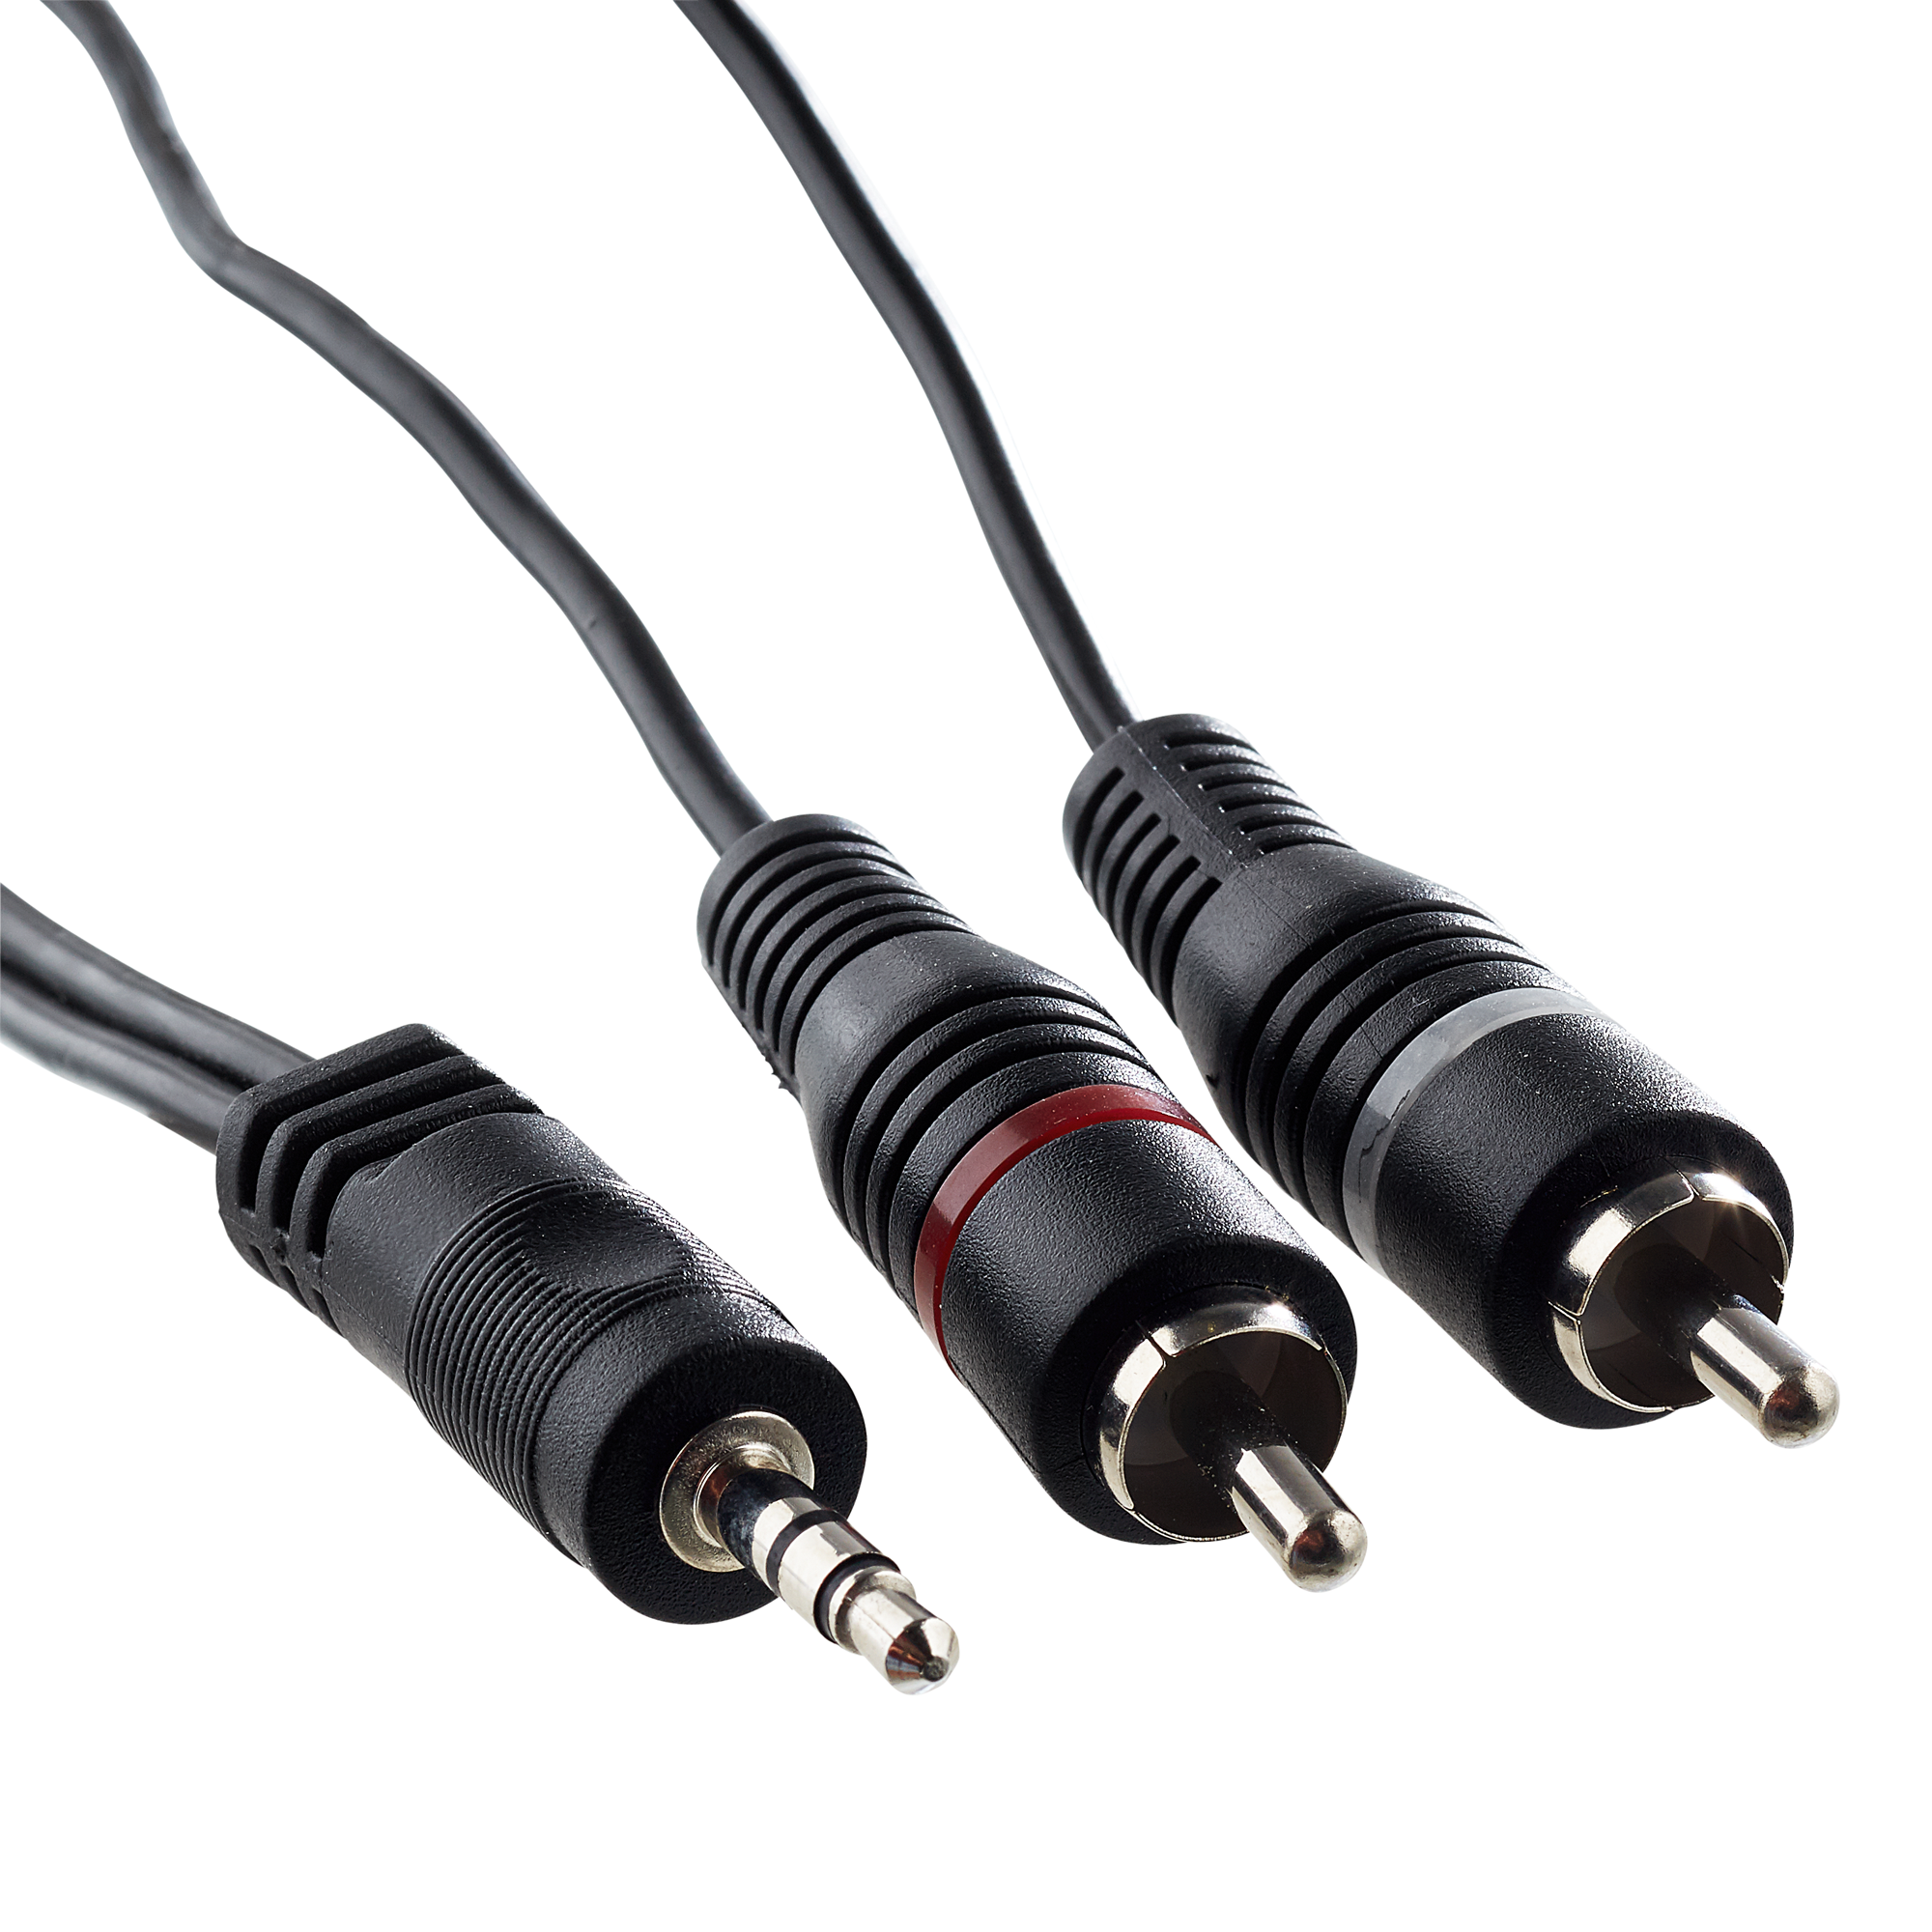 Audio-Adapterkabel stereo schwarz 1,5 m + product picture